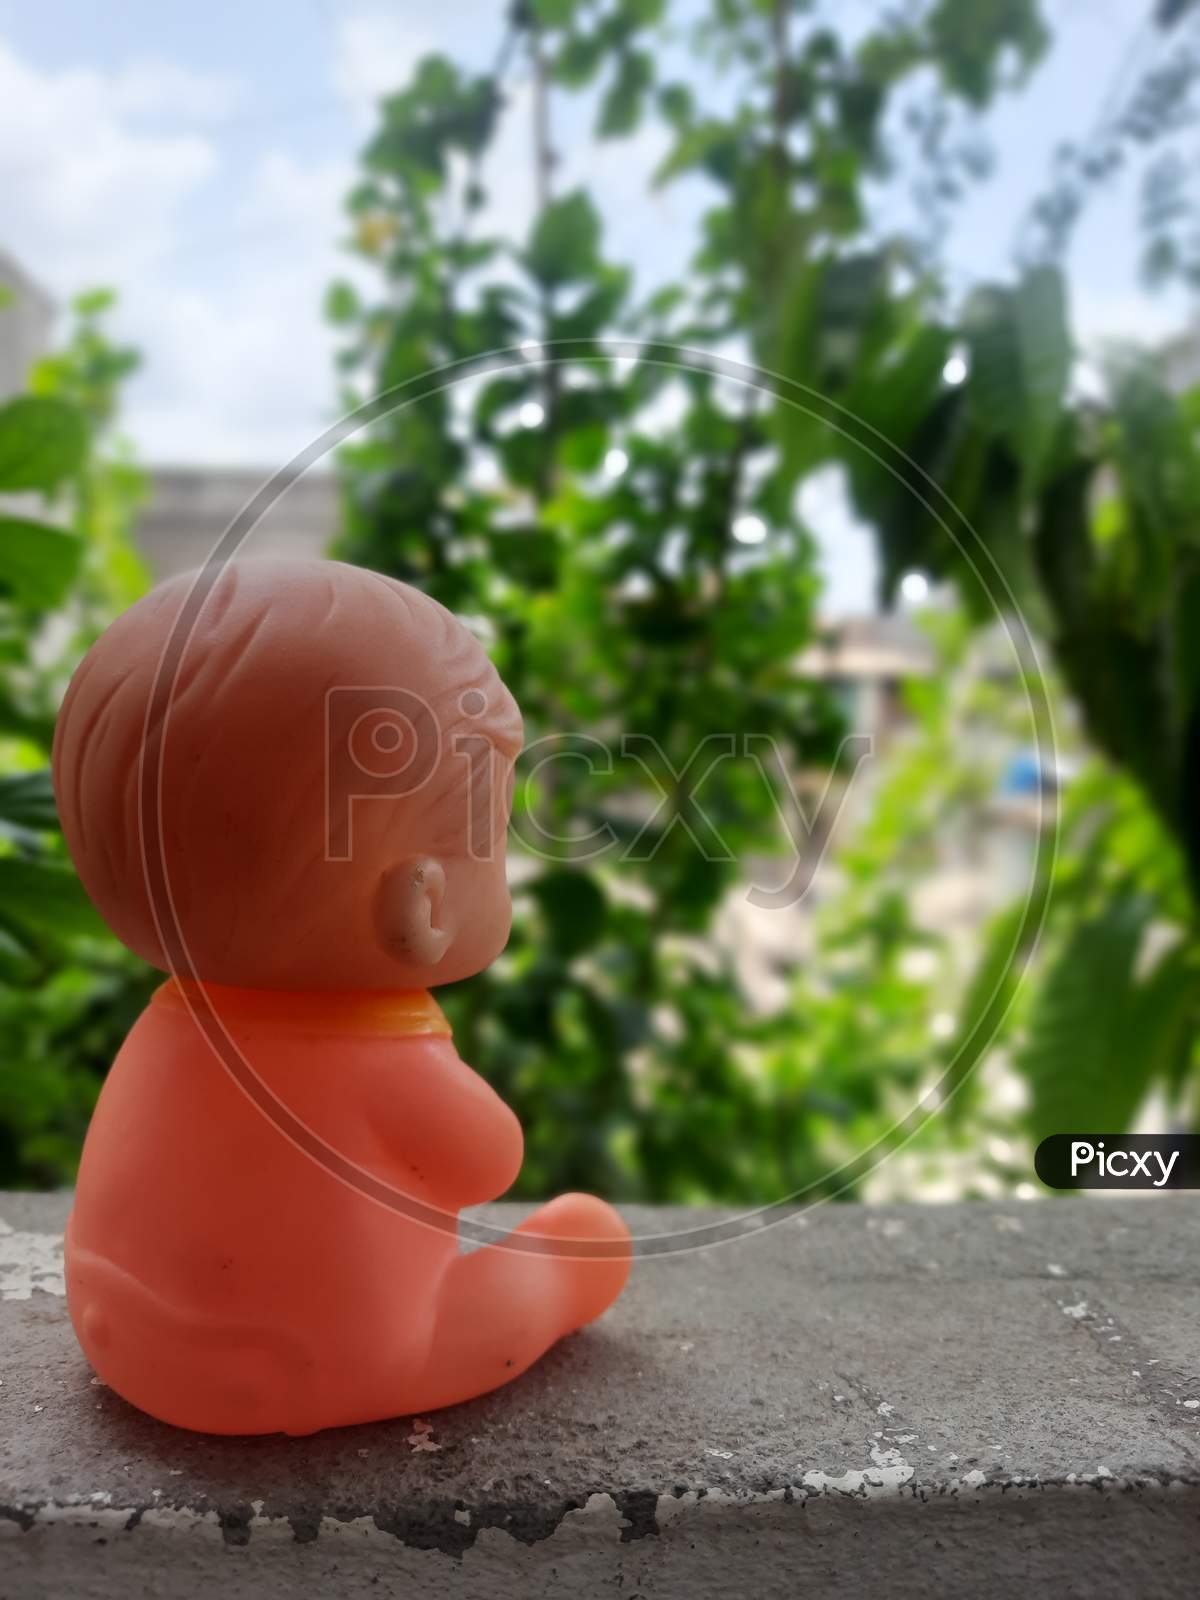 a sad baby toy sitting angry watching the greenery, tress and leaves